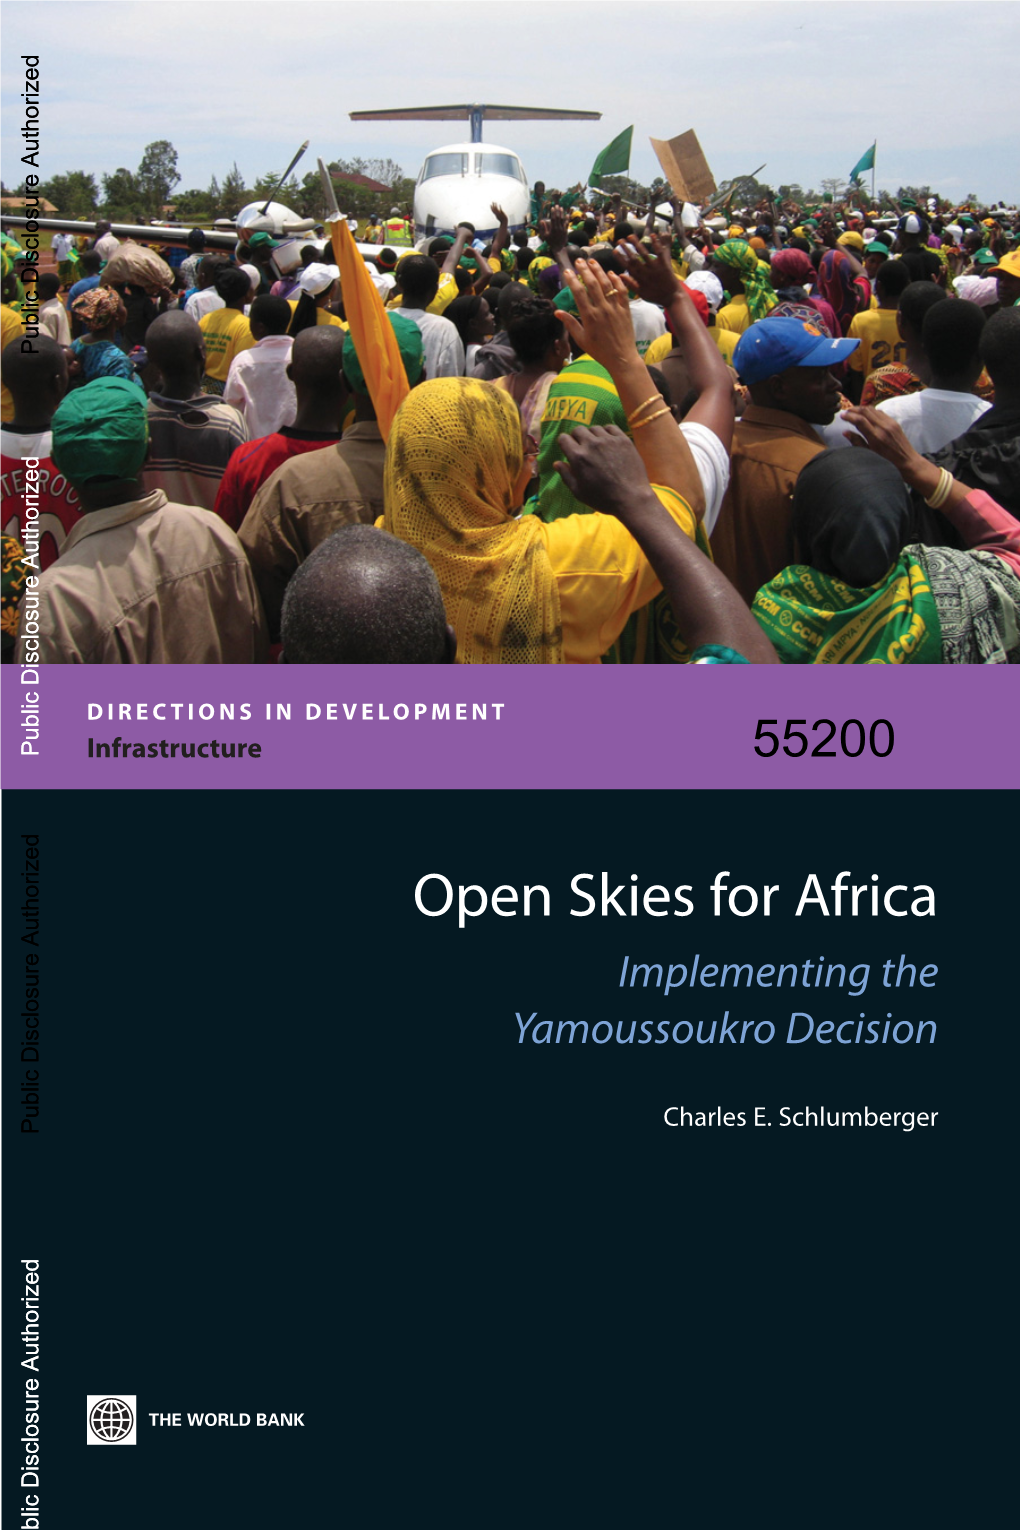 Implementing the Yamoussoukro Decision